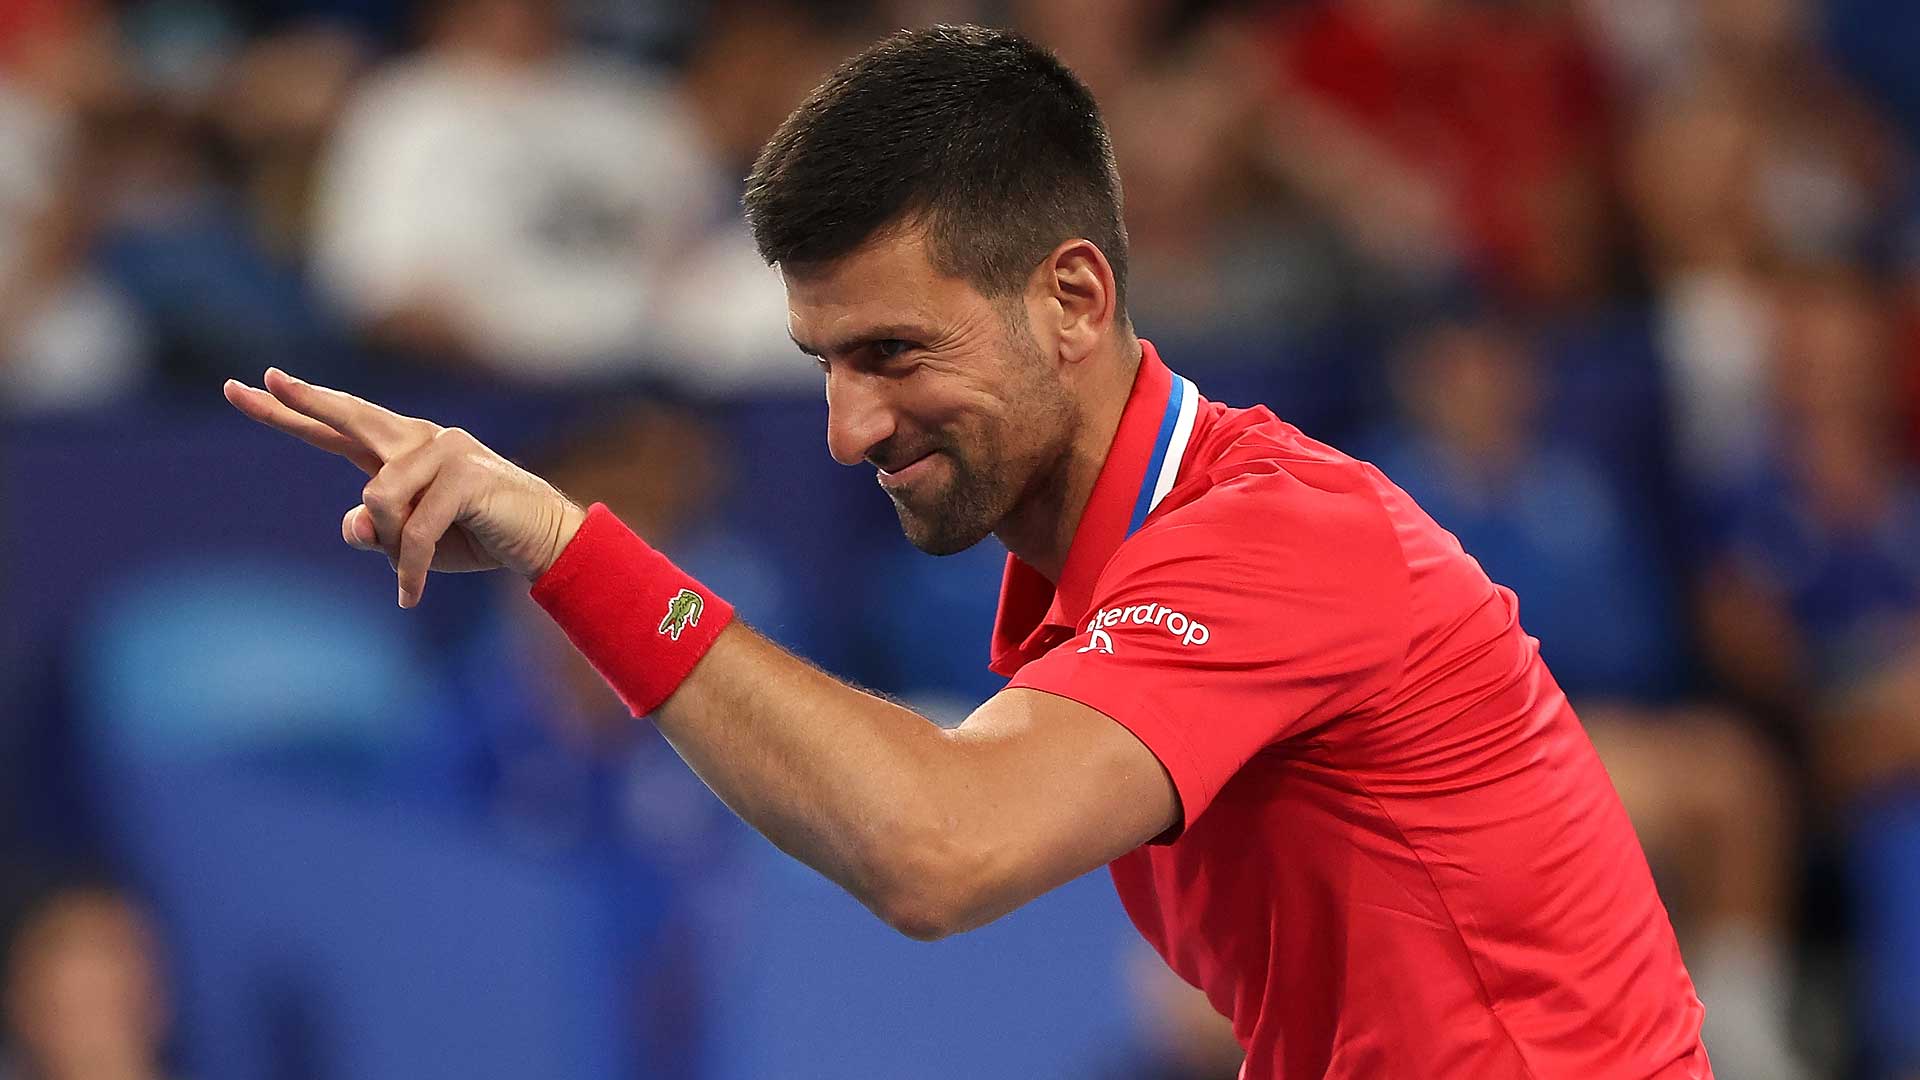 Novak Djokovic jokingly points at Zheng Qinwen during Serbia's United Cup tie with China on Sunday.